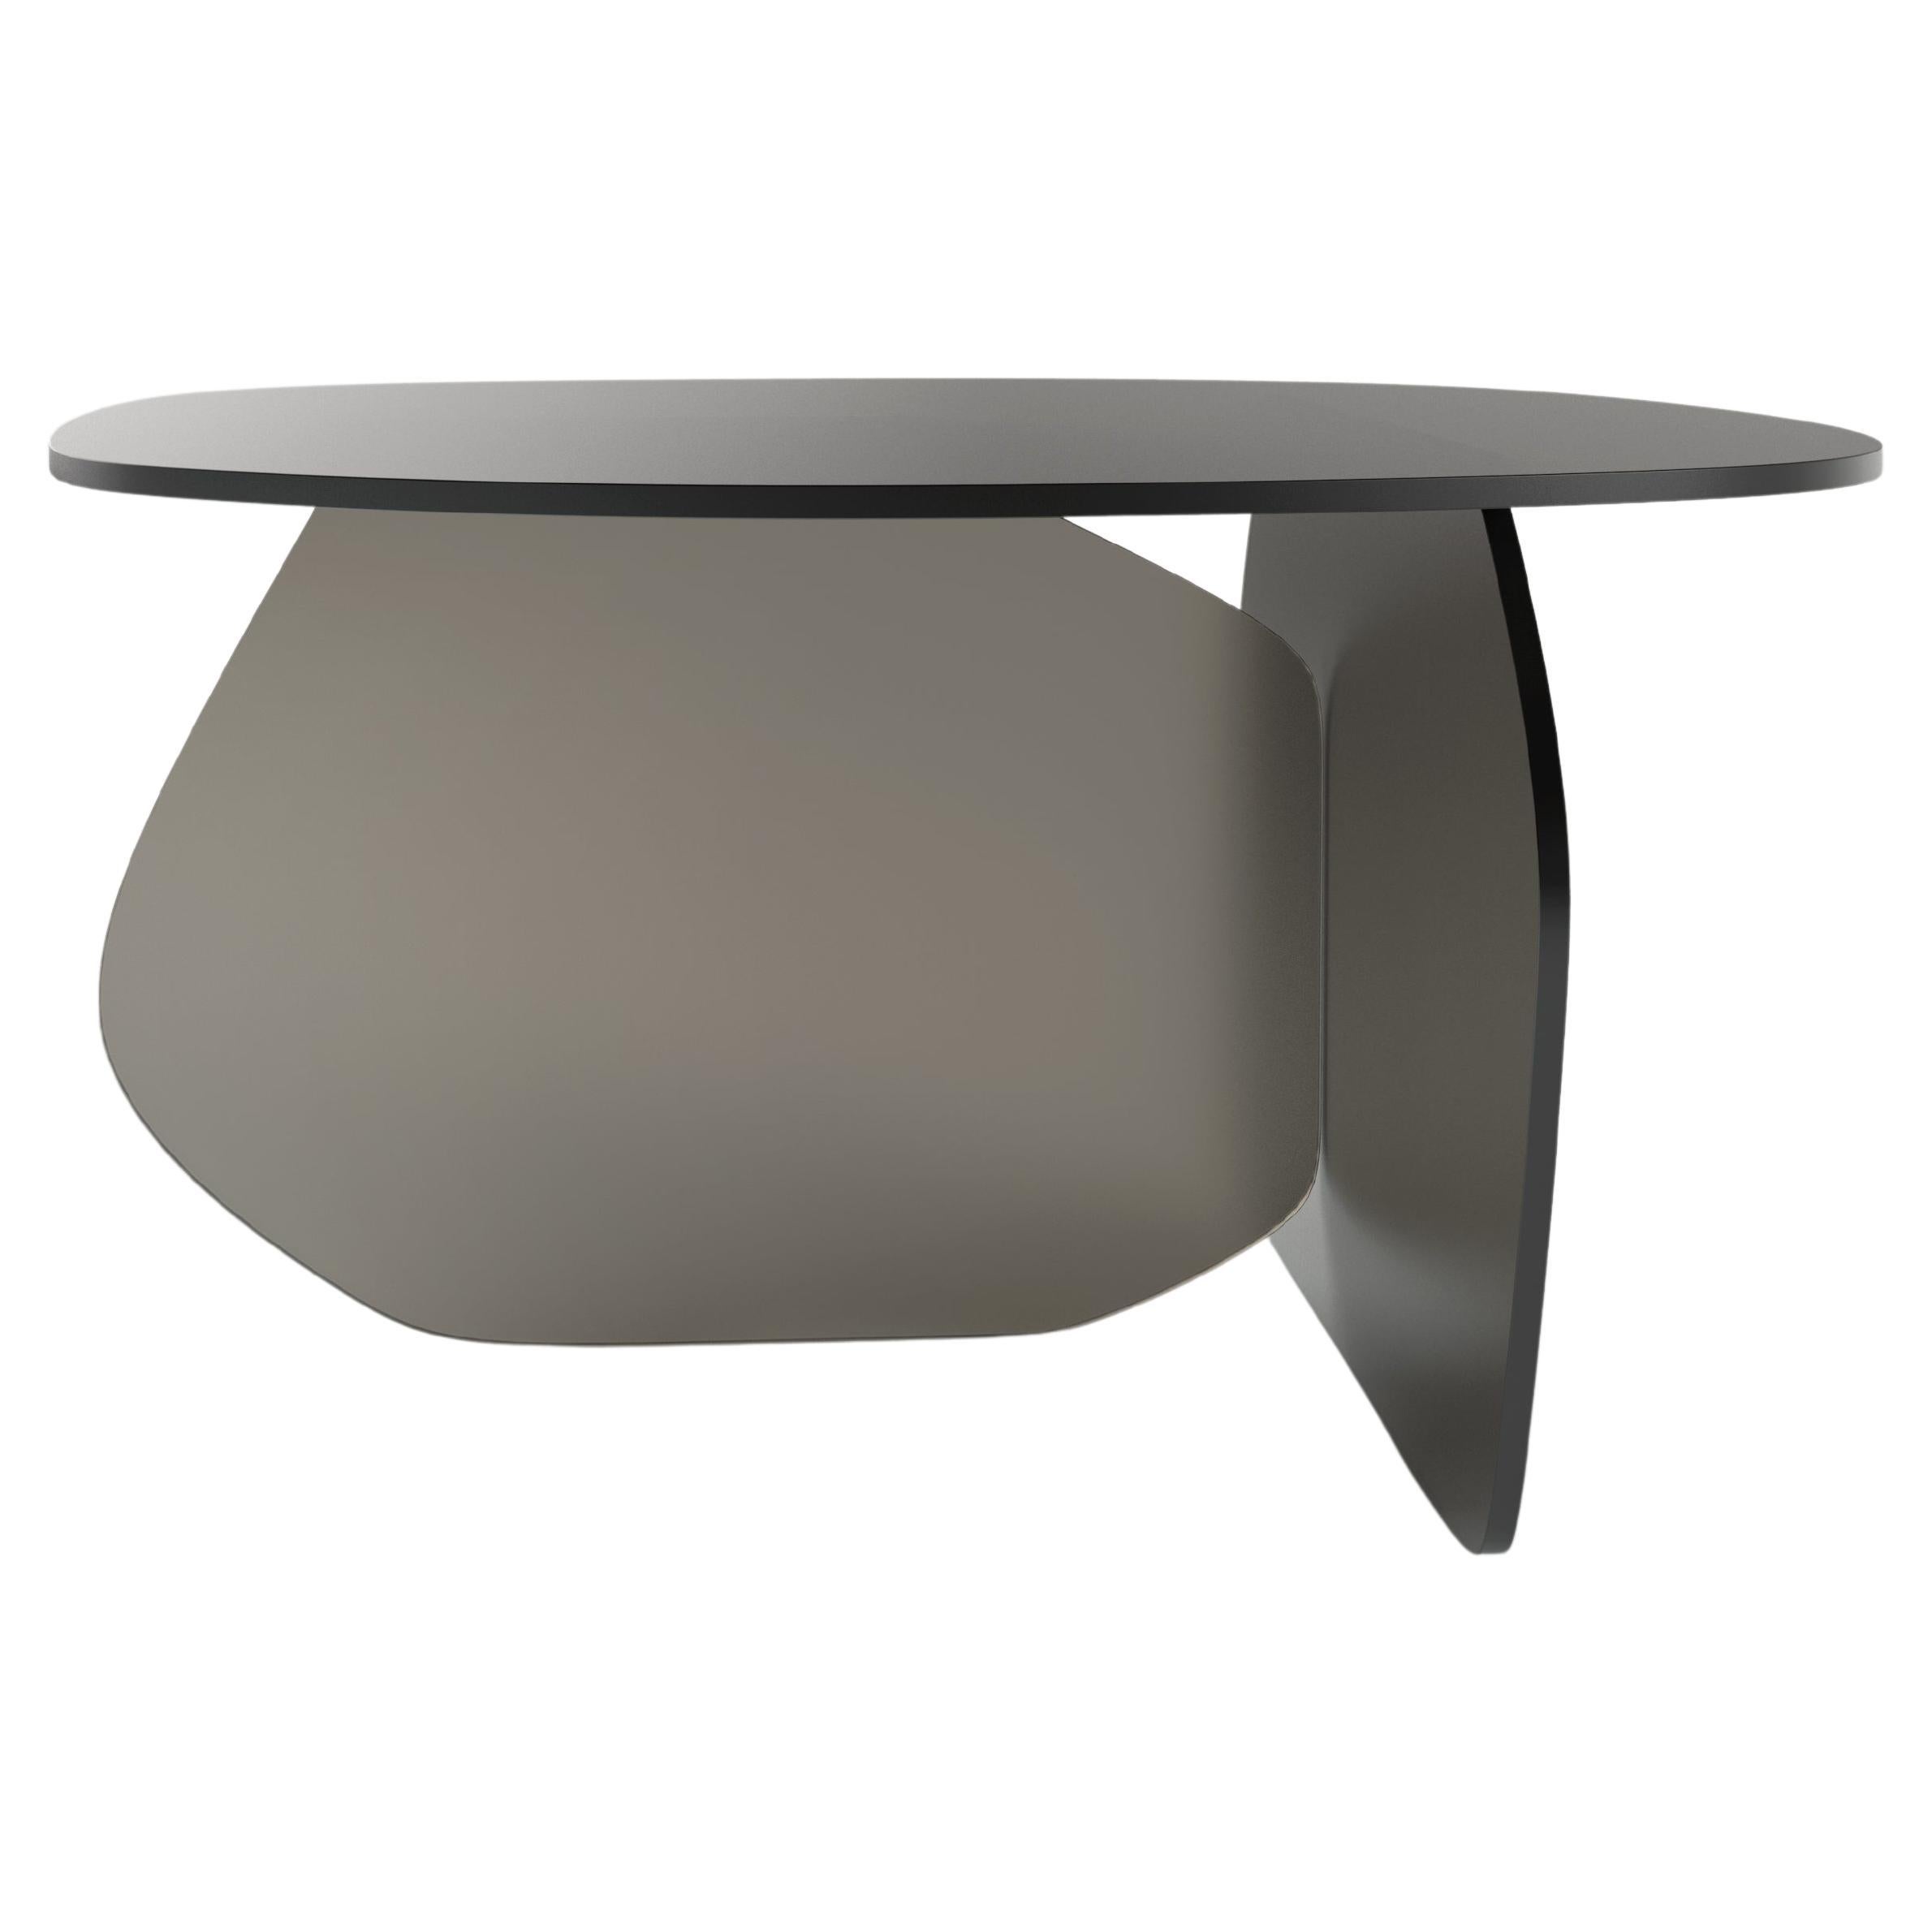 Limited Edition Bronzed Glass Table, Panorama V2 by Edizione Limitata